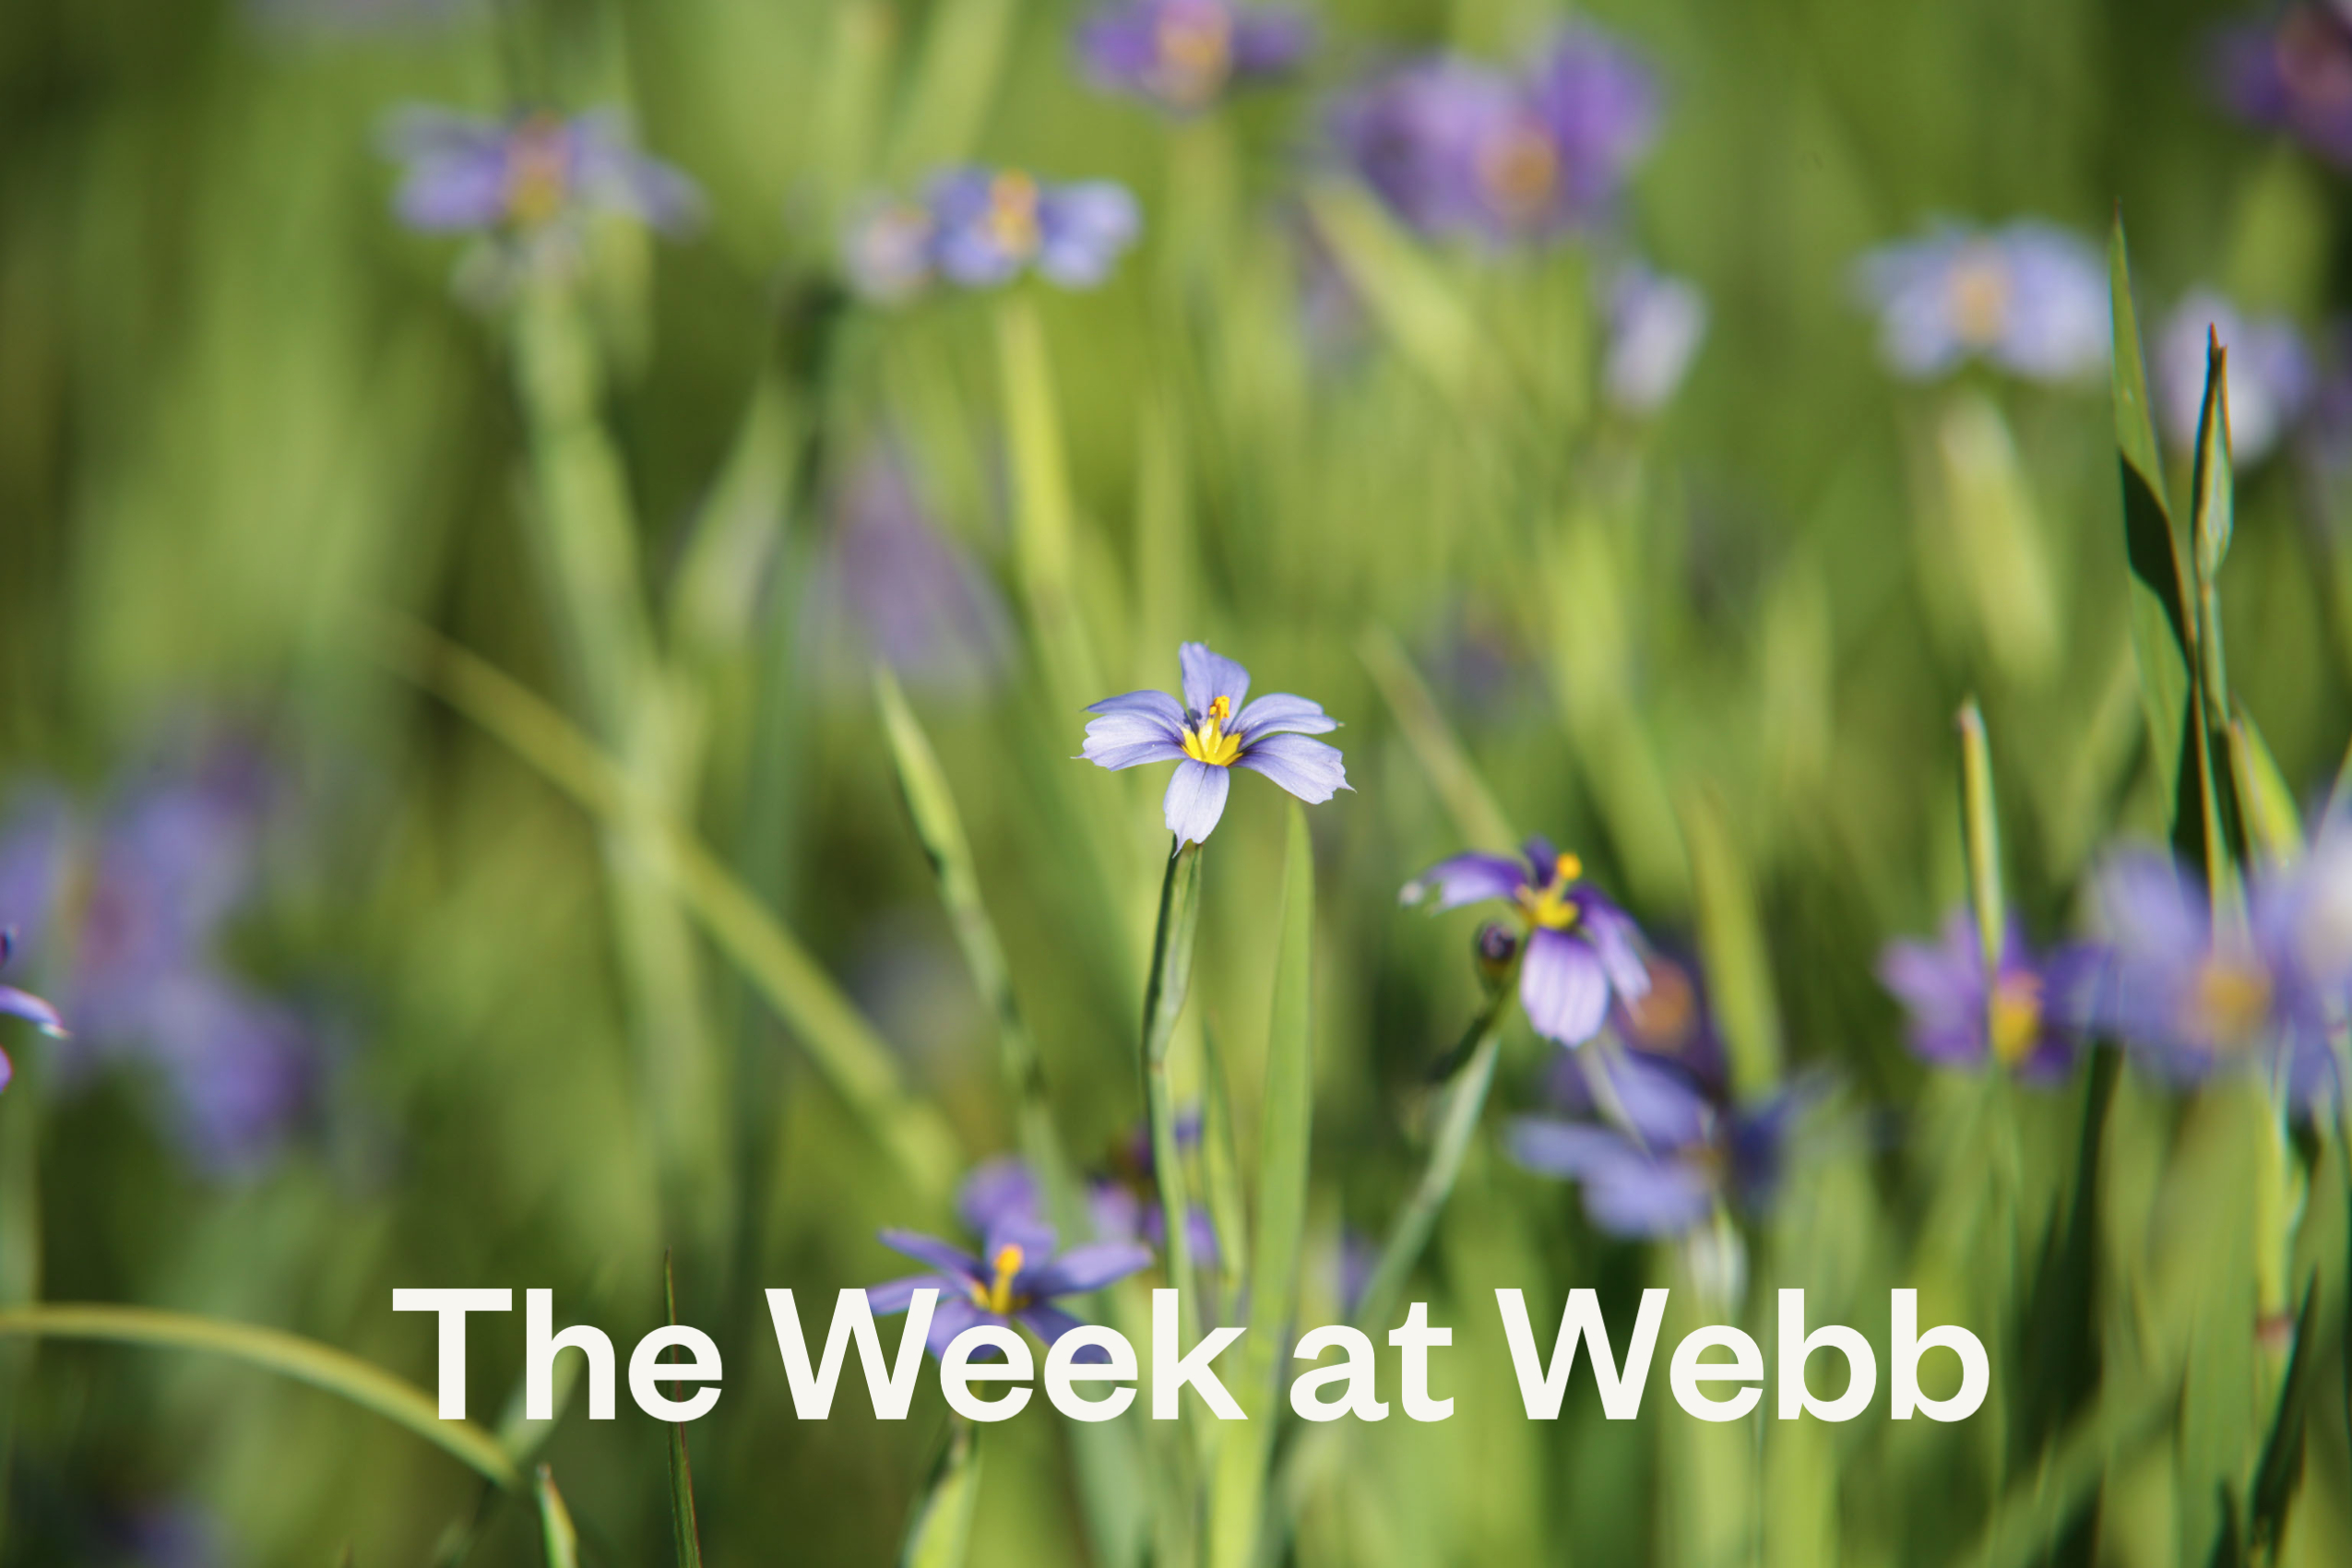 The Week at Webb title slide features blue eyed grass in bloom